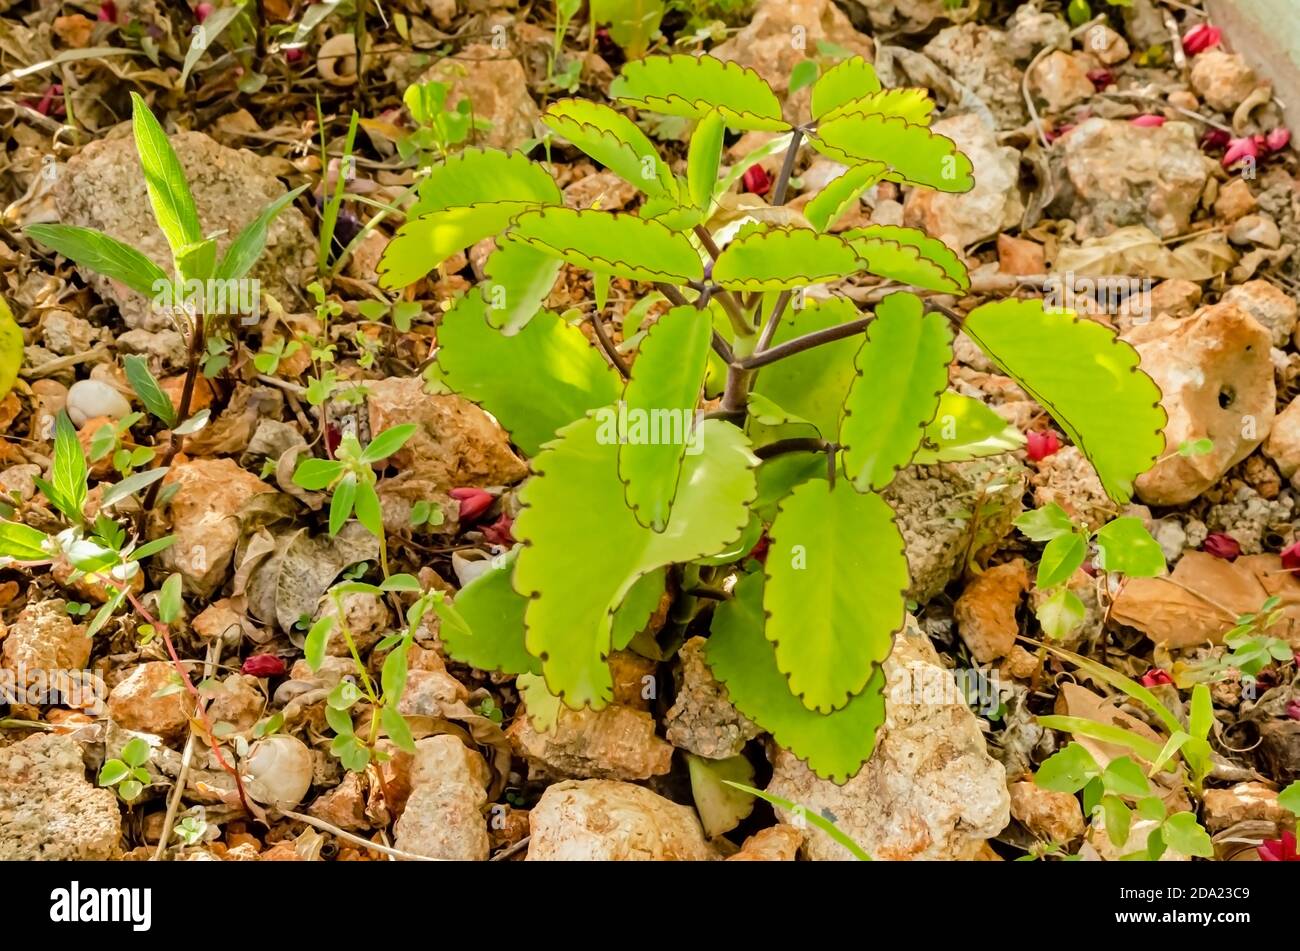 Morning sunlight brightens the leaves of a leaf of life plant that is growing among stone. Stock Photo